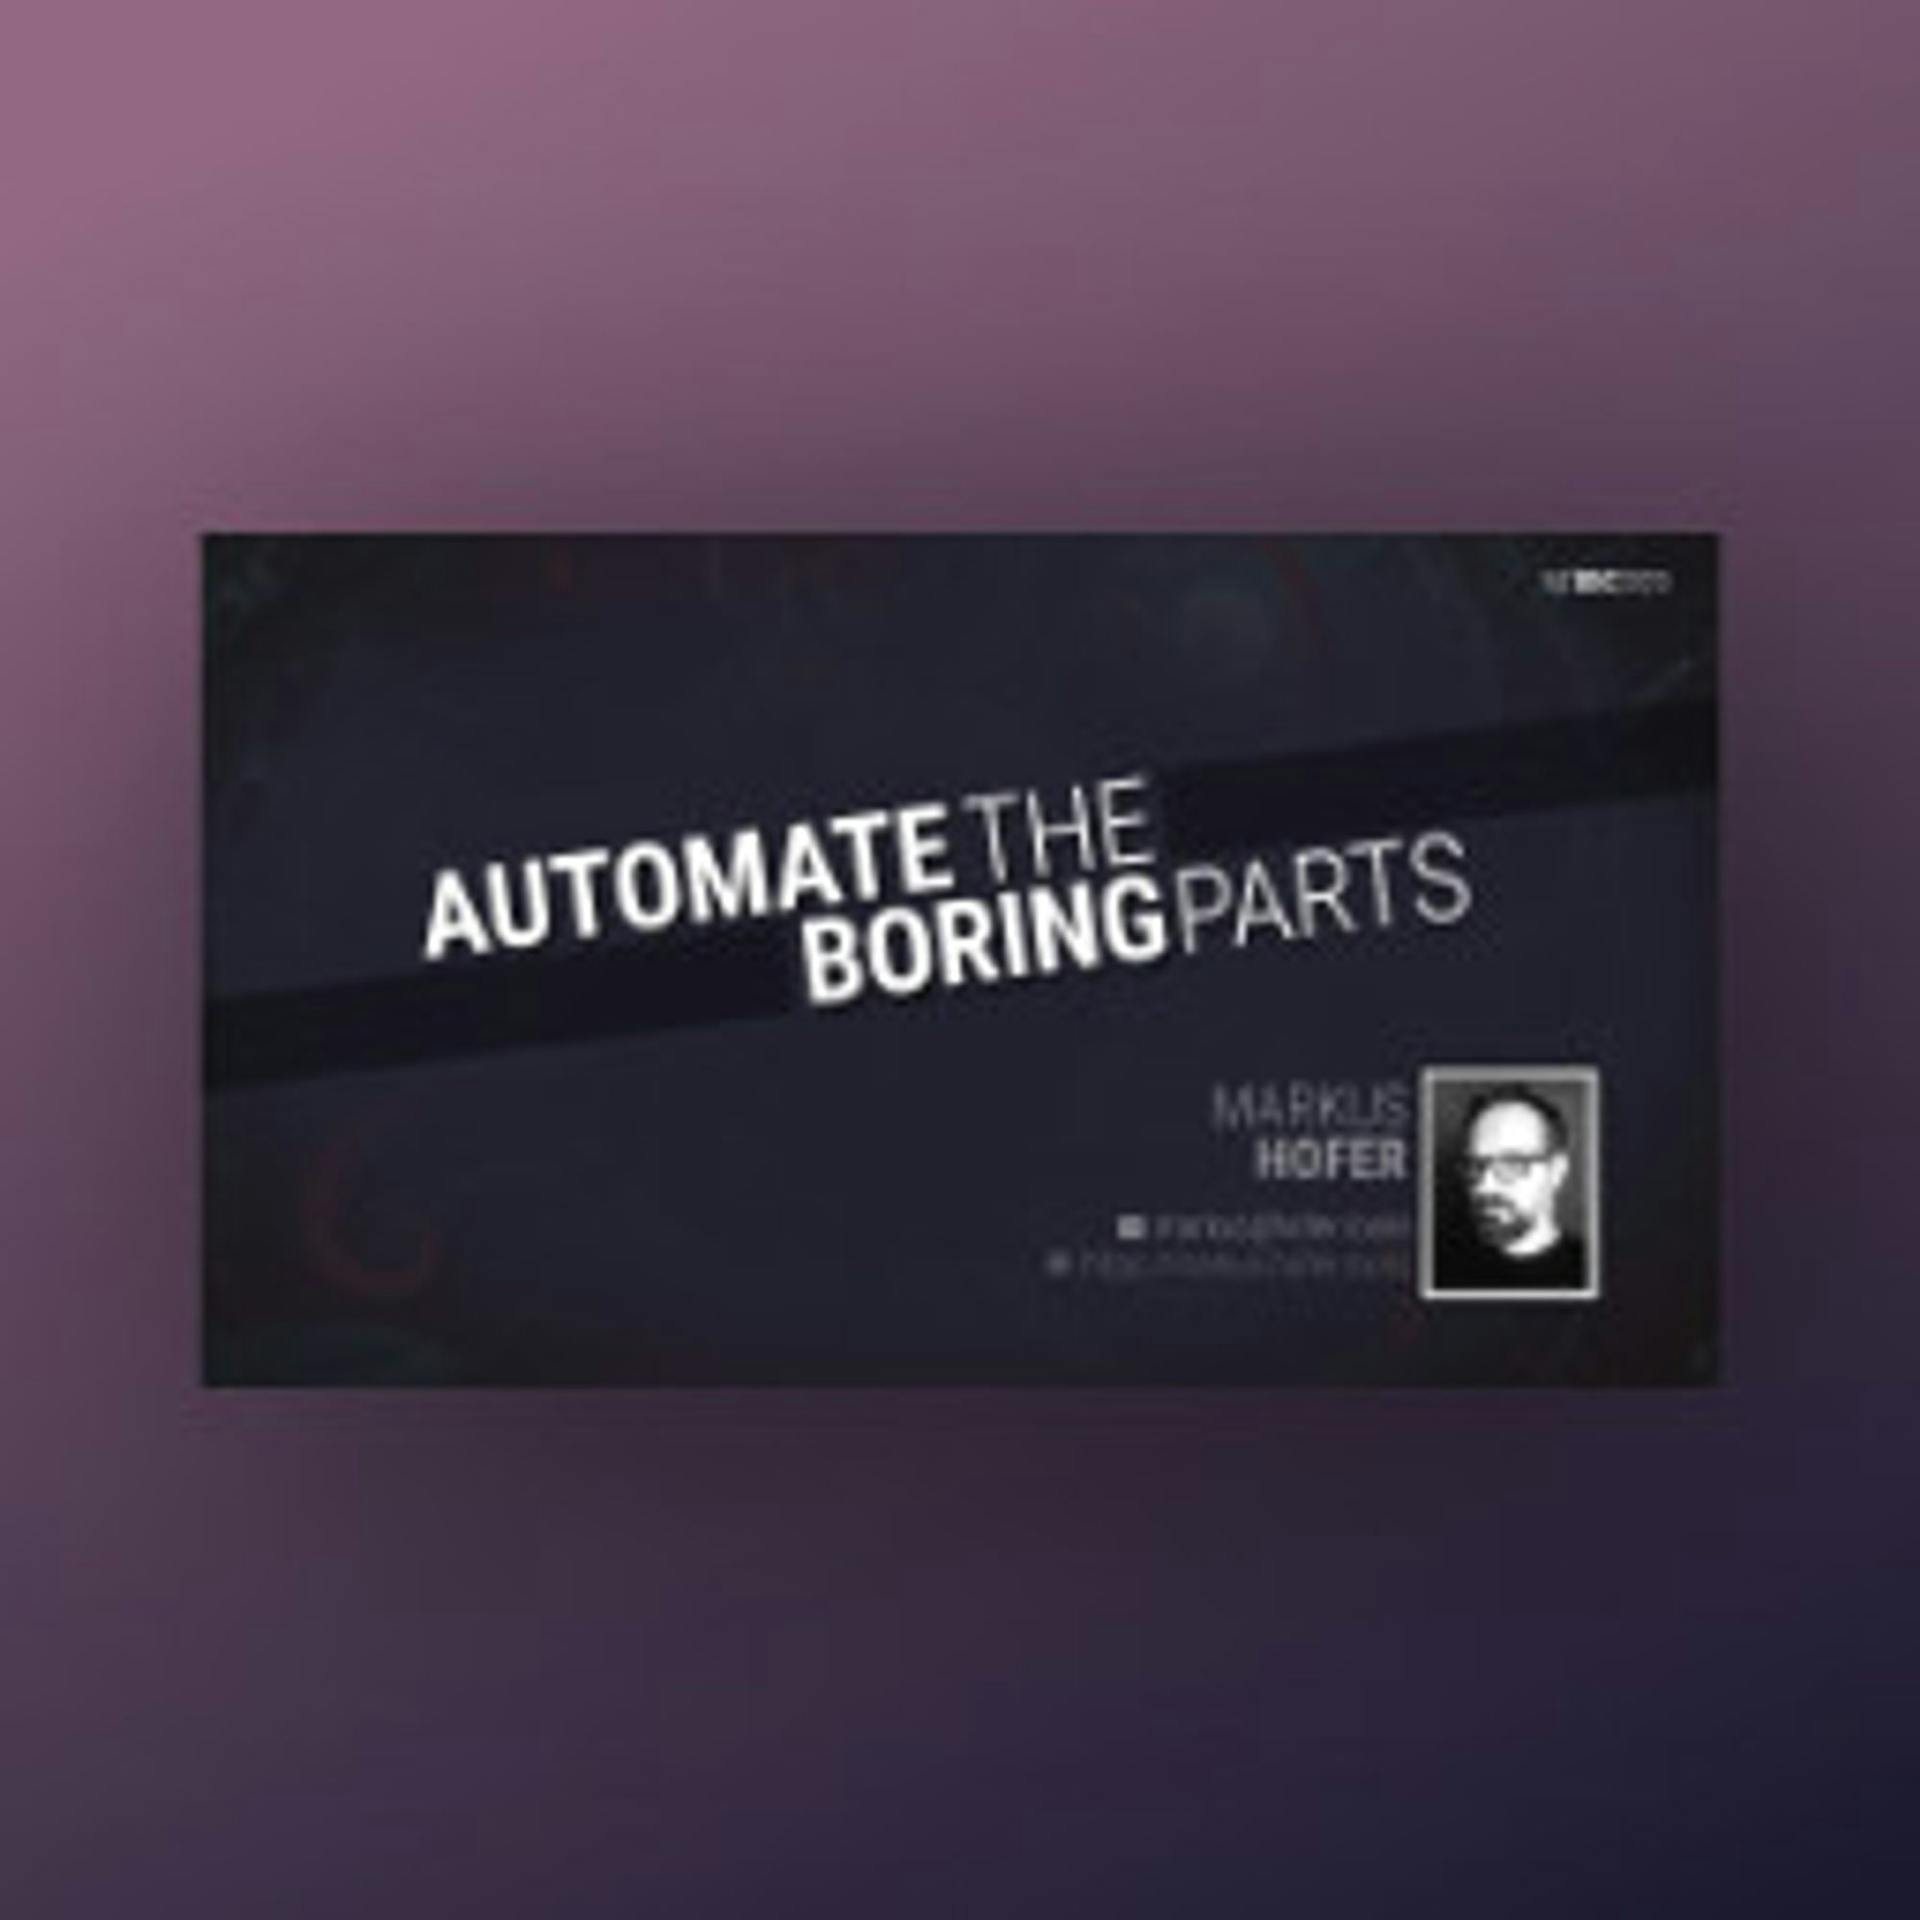 Automate the boring parts